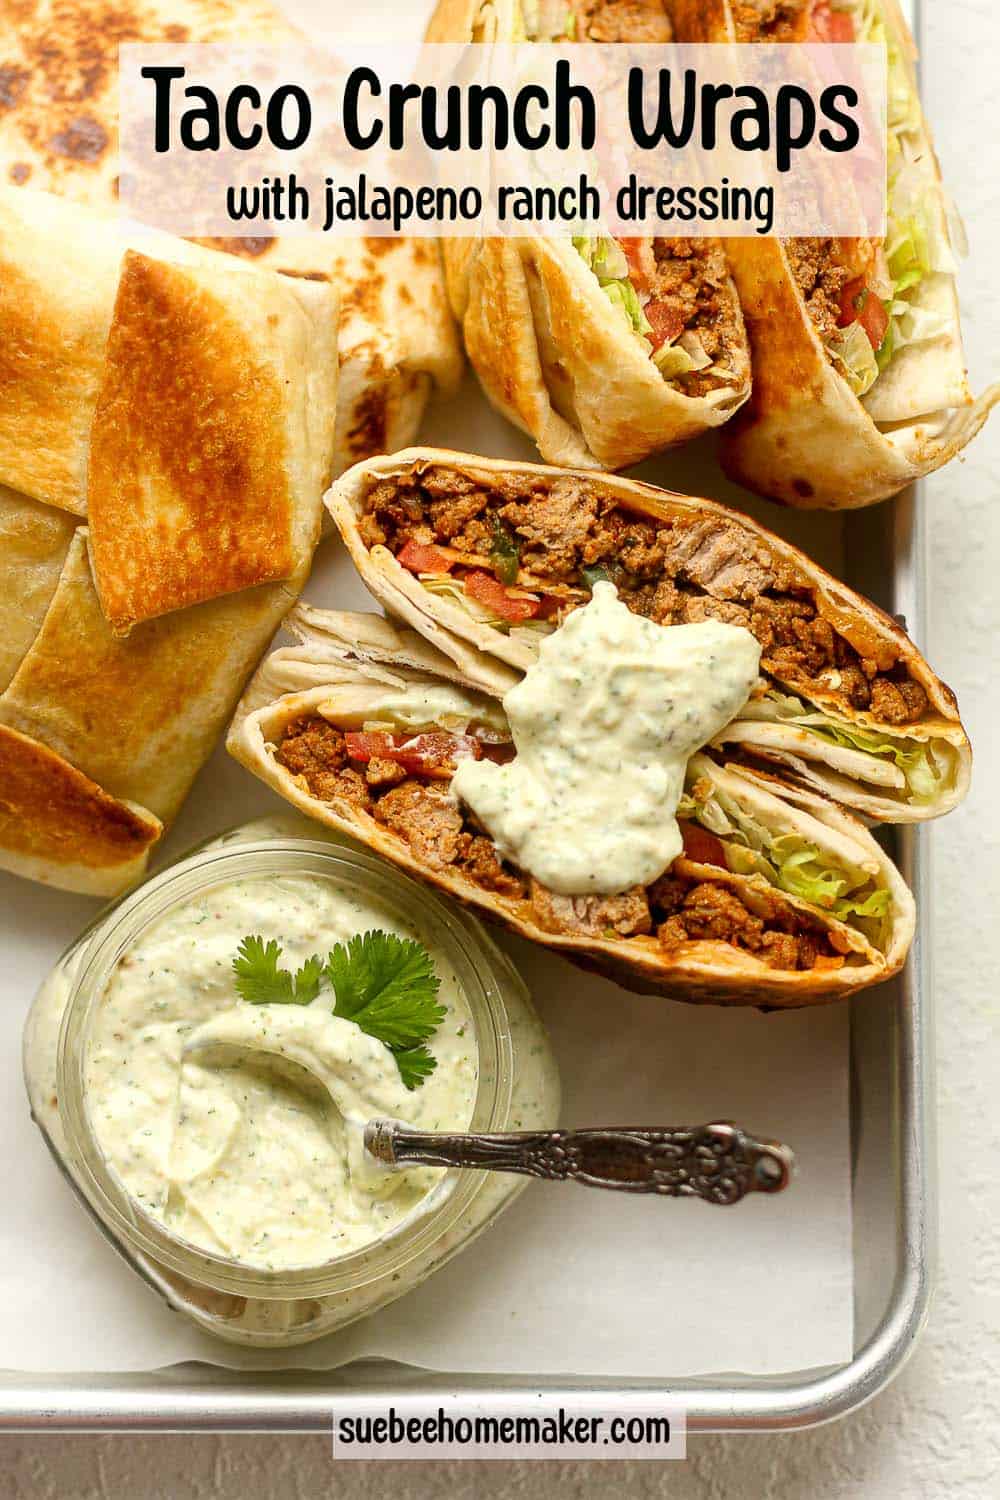 A tray of taco crunch wraps with jalapeno ranch.